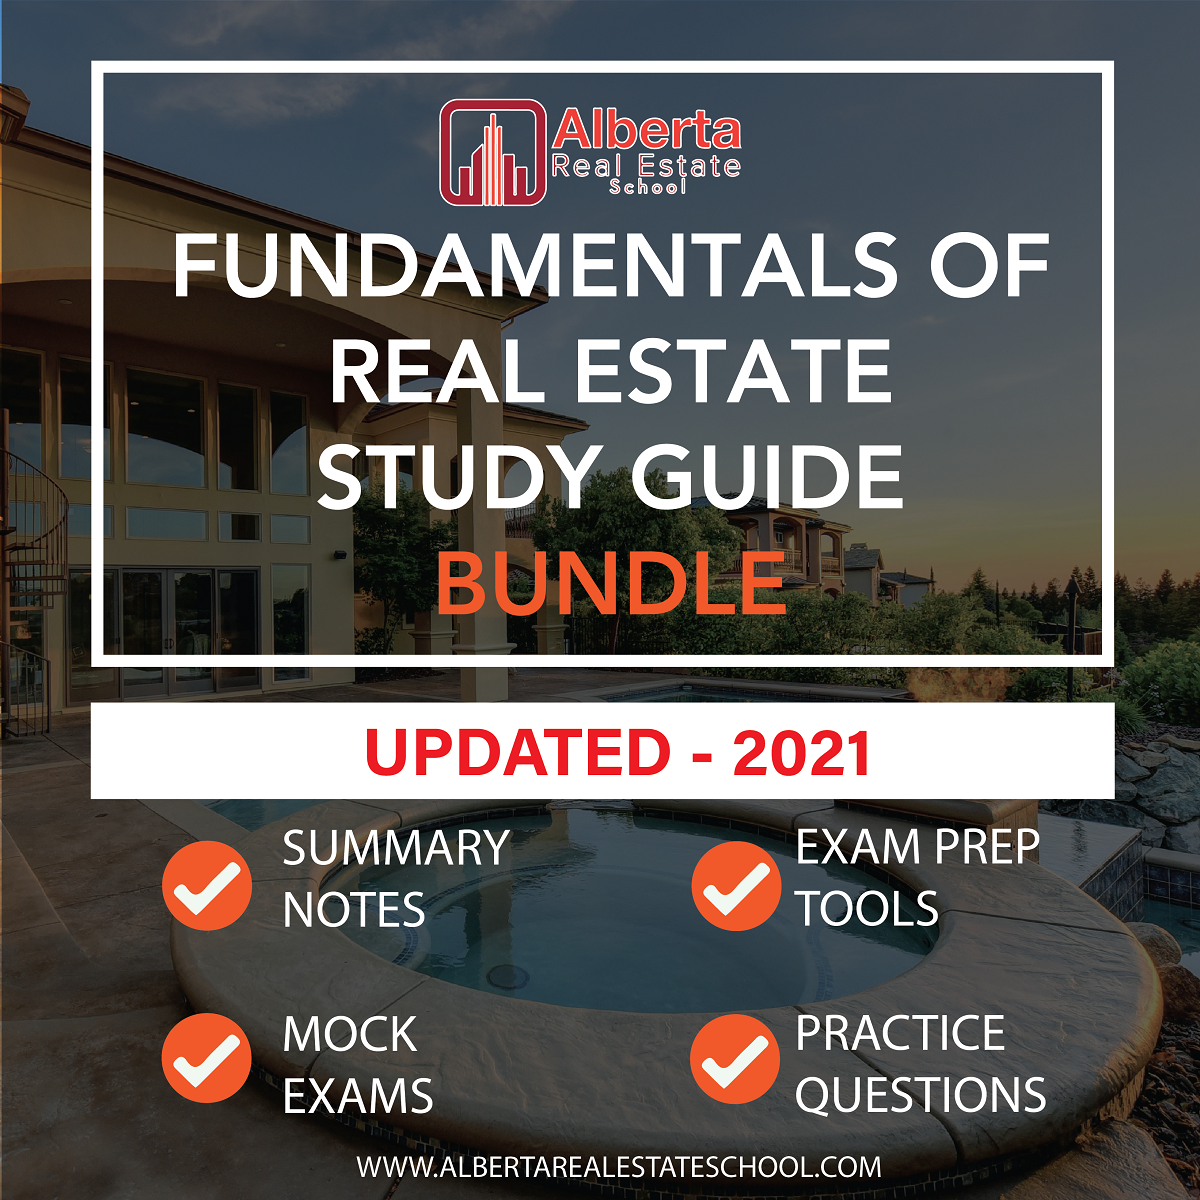 A product featuring study guide for Fundamentals of Real Estate Business in Alberta.